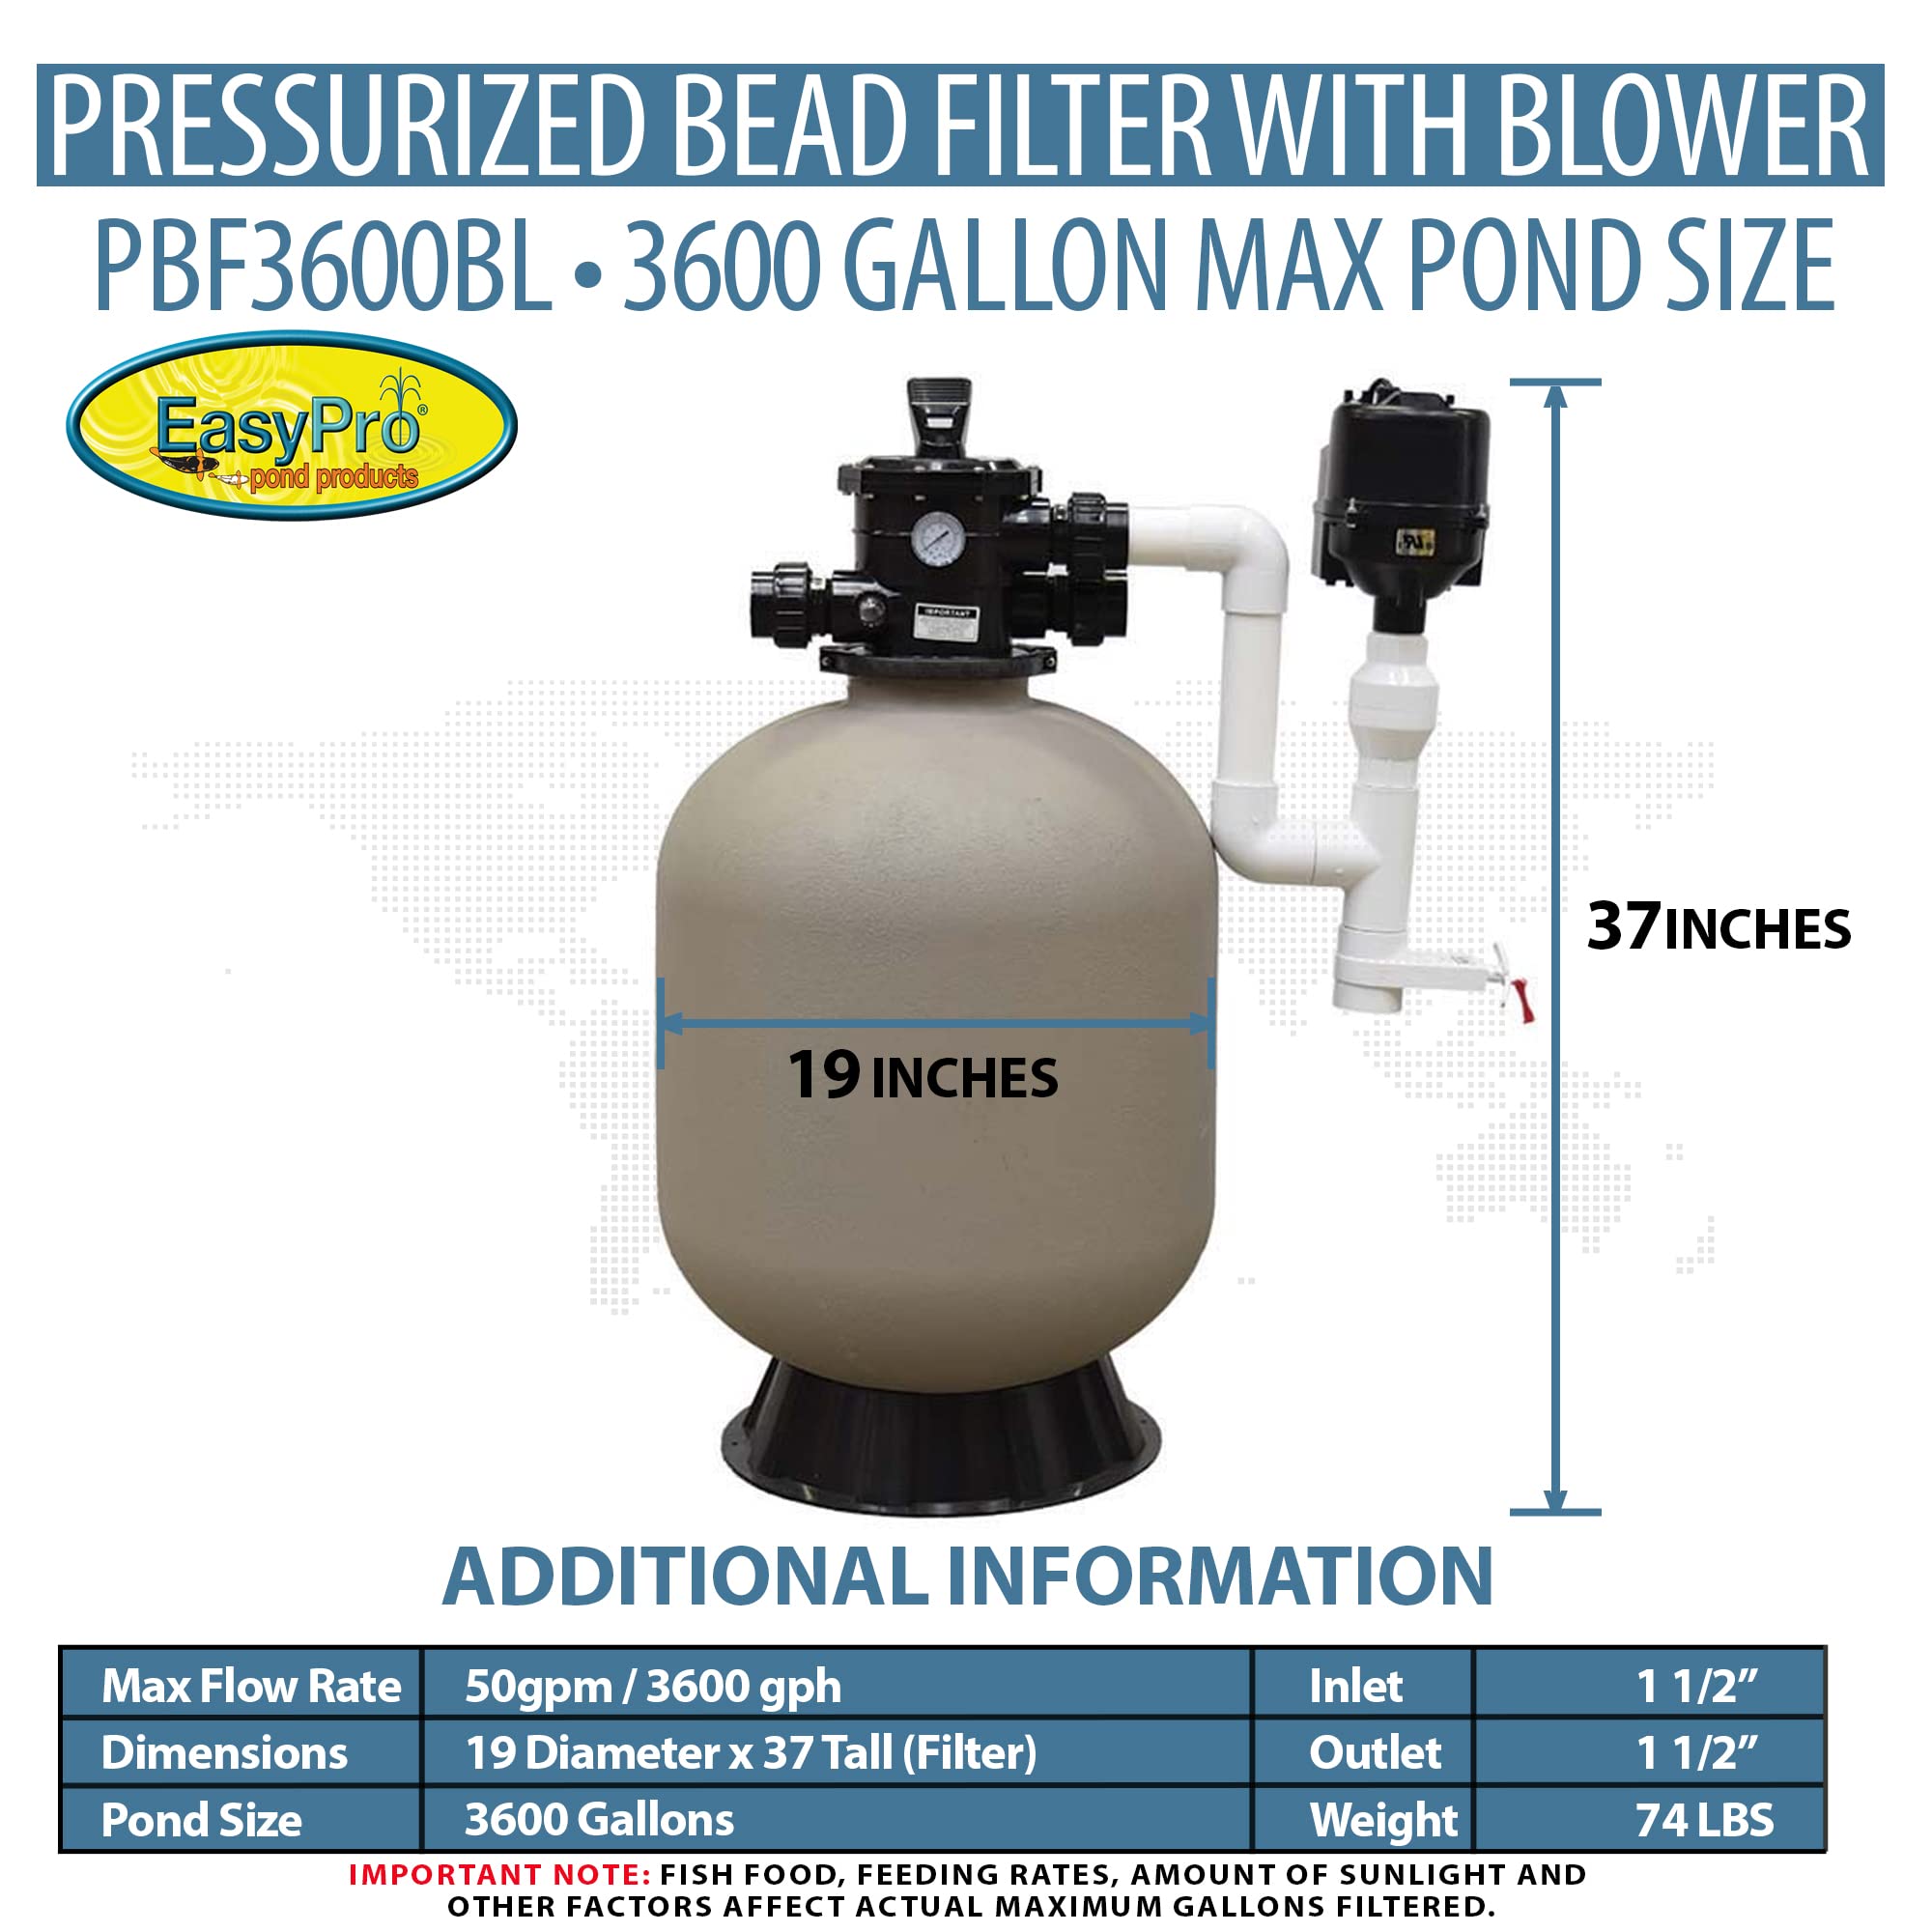 EasyPro PBF3600BL Pressurized Bead Filter with Blower for Ponds & Fish Systems / 3600 Gallon Max. / Biological & Mechanical Media Provides Excellent Filtration/Easy Intallation & Cleaning